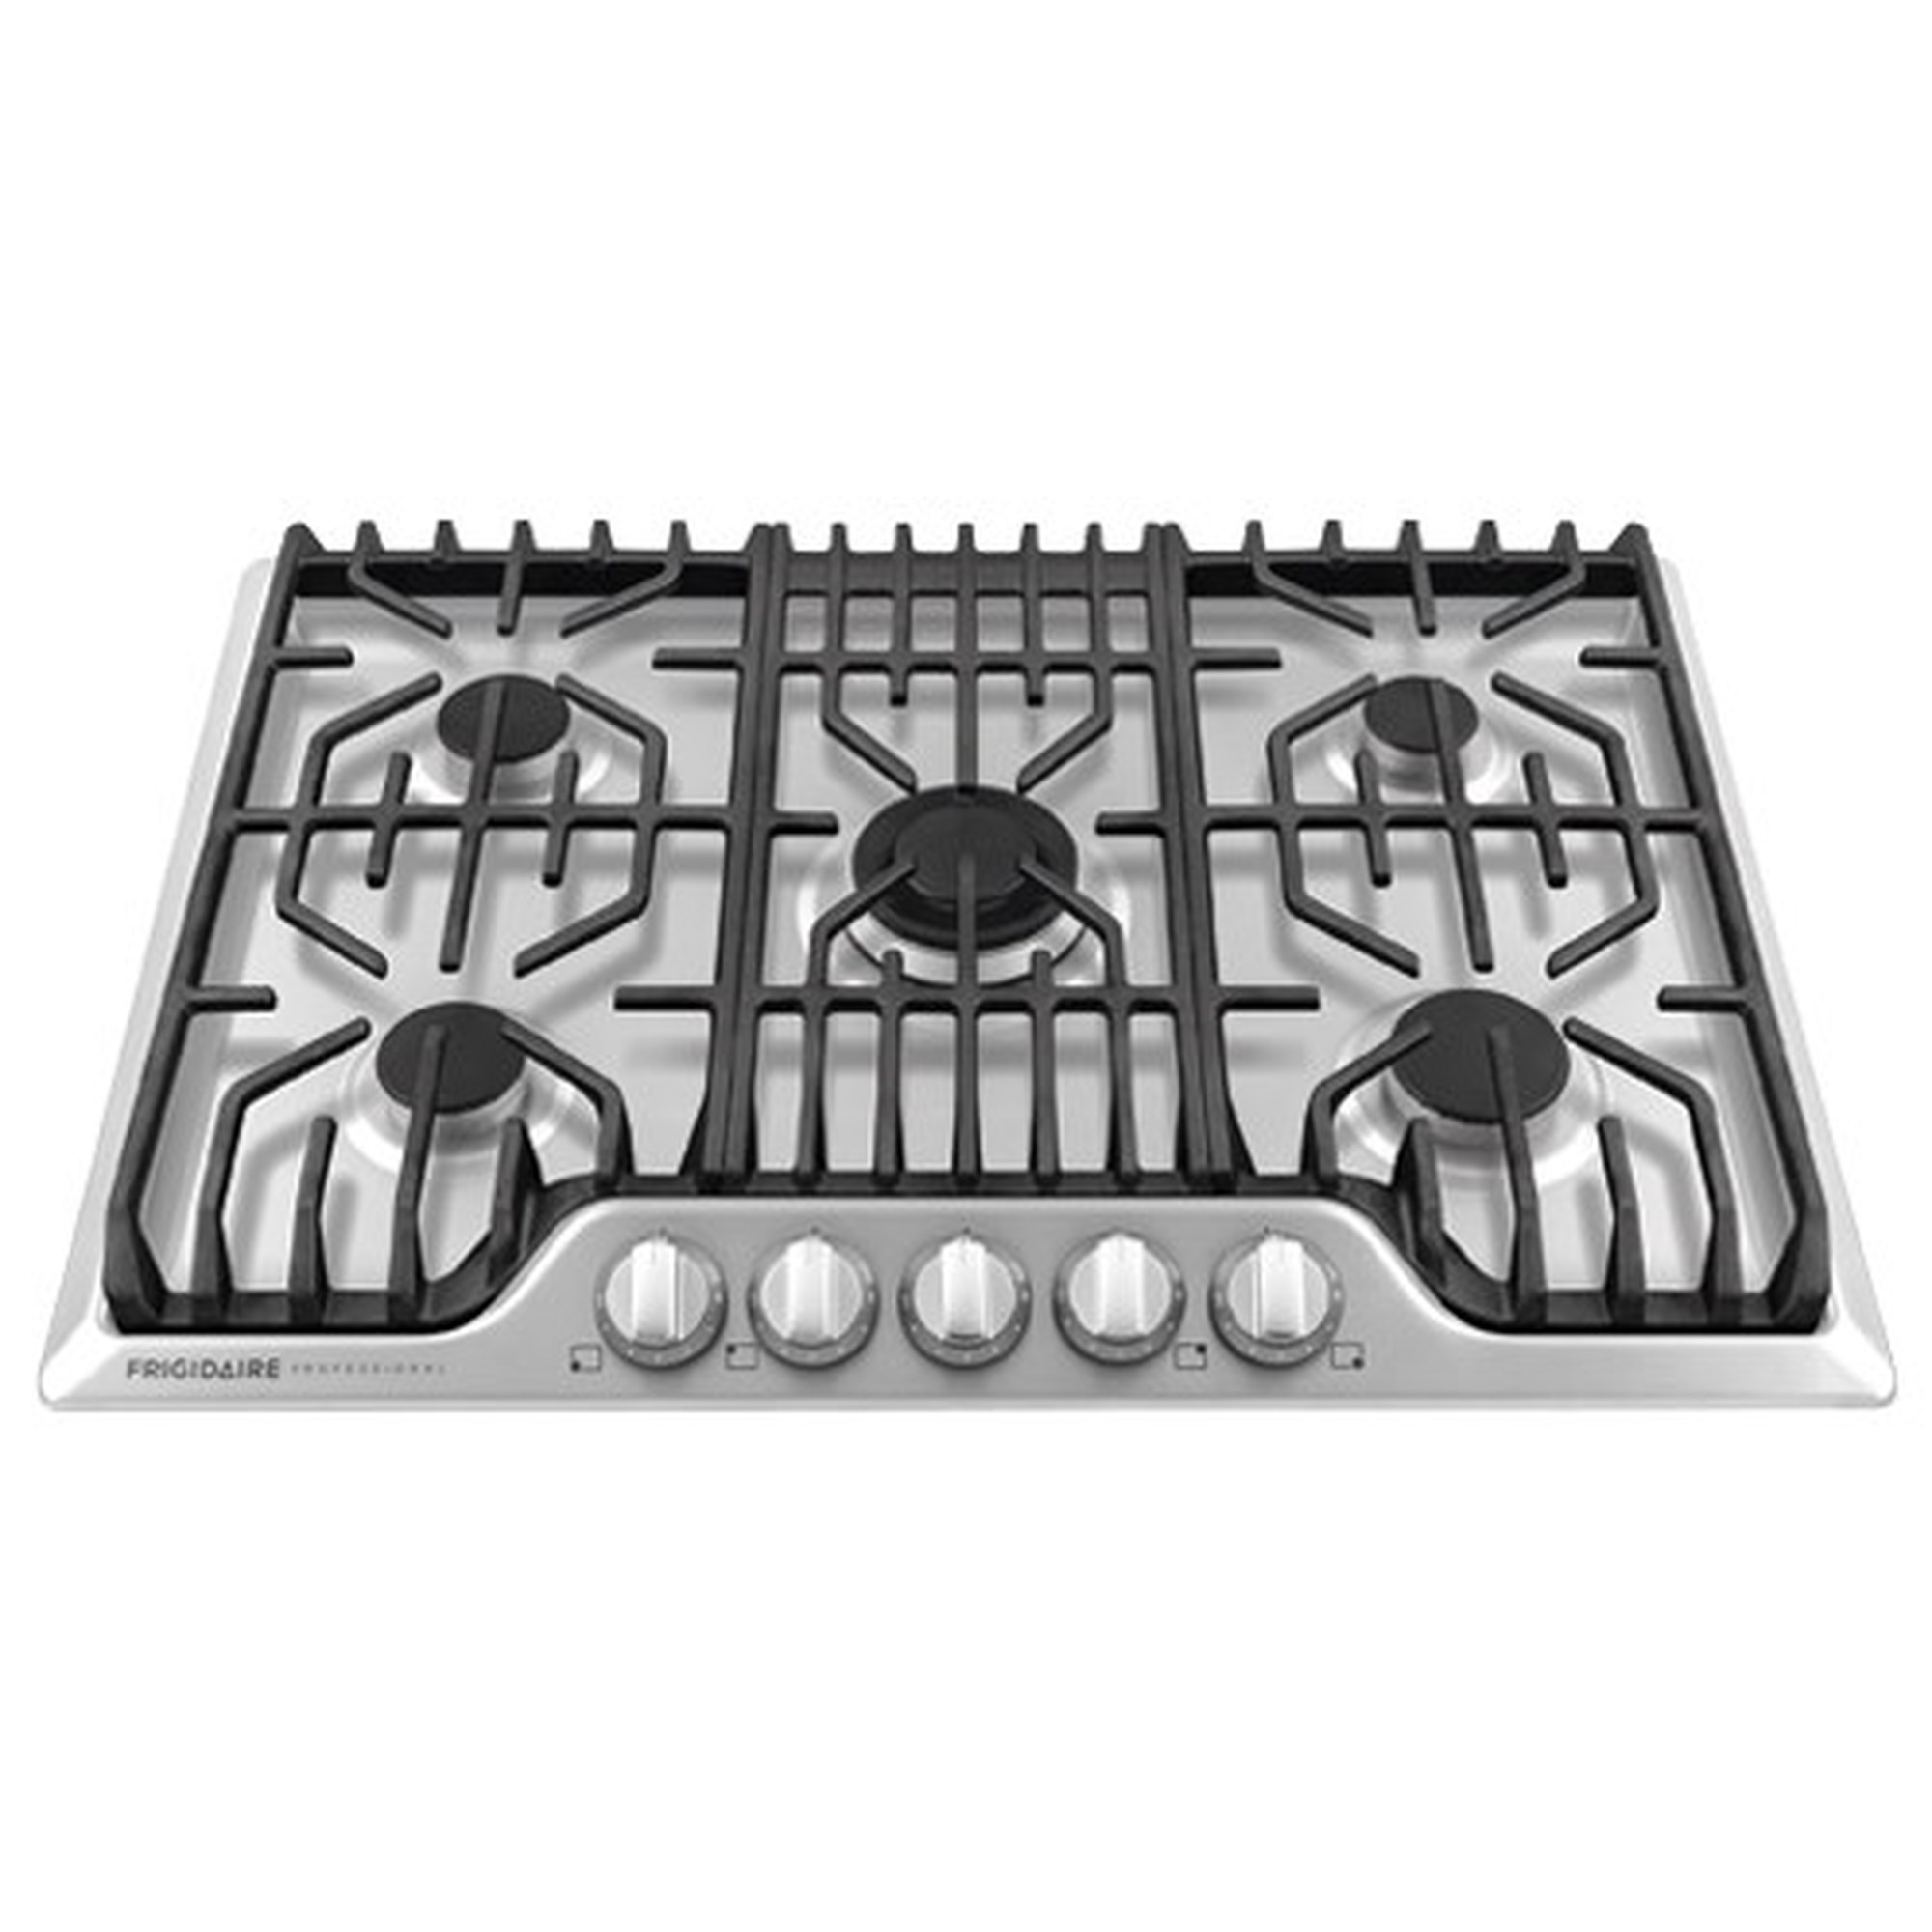 30 Induction Cooktop Stainless Steel-FPIC3077RF